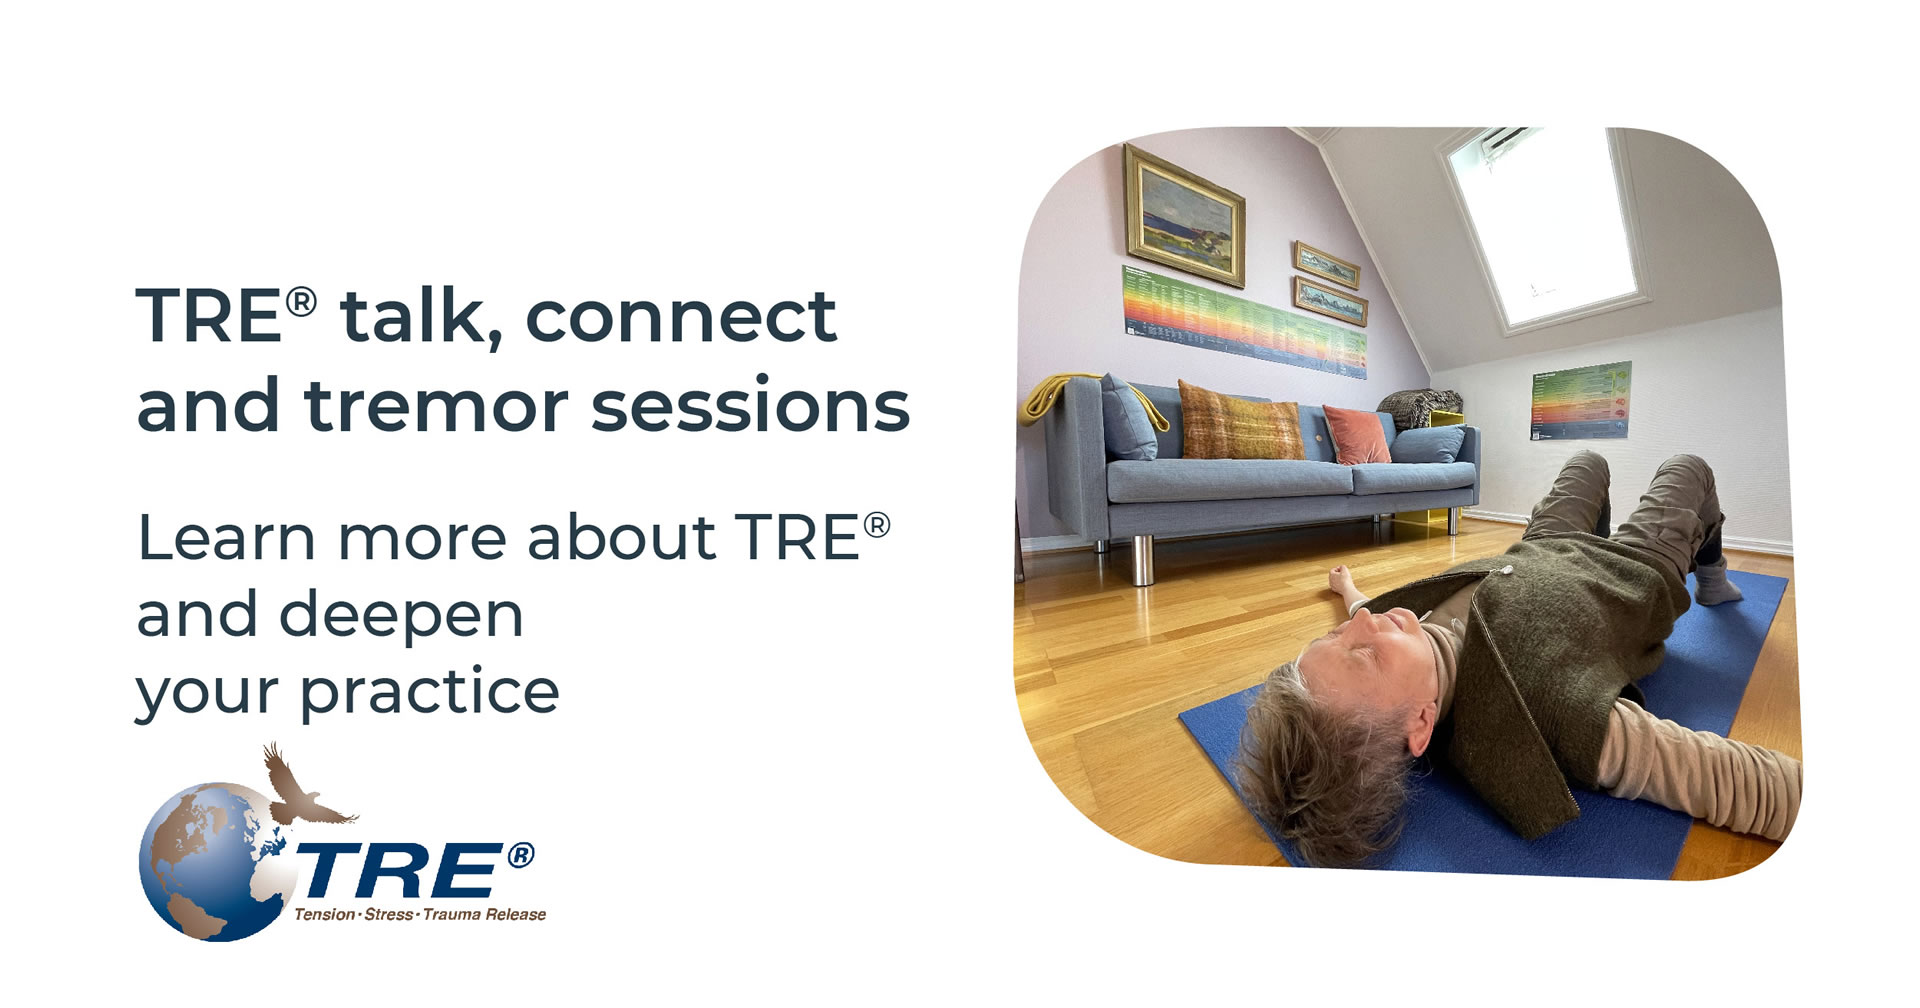 TRE® talk, connect and tremor sessions